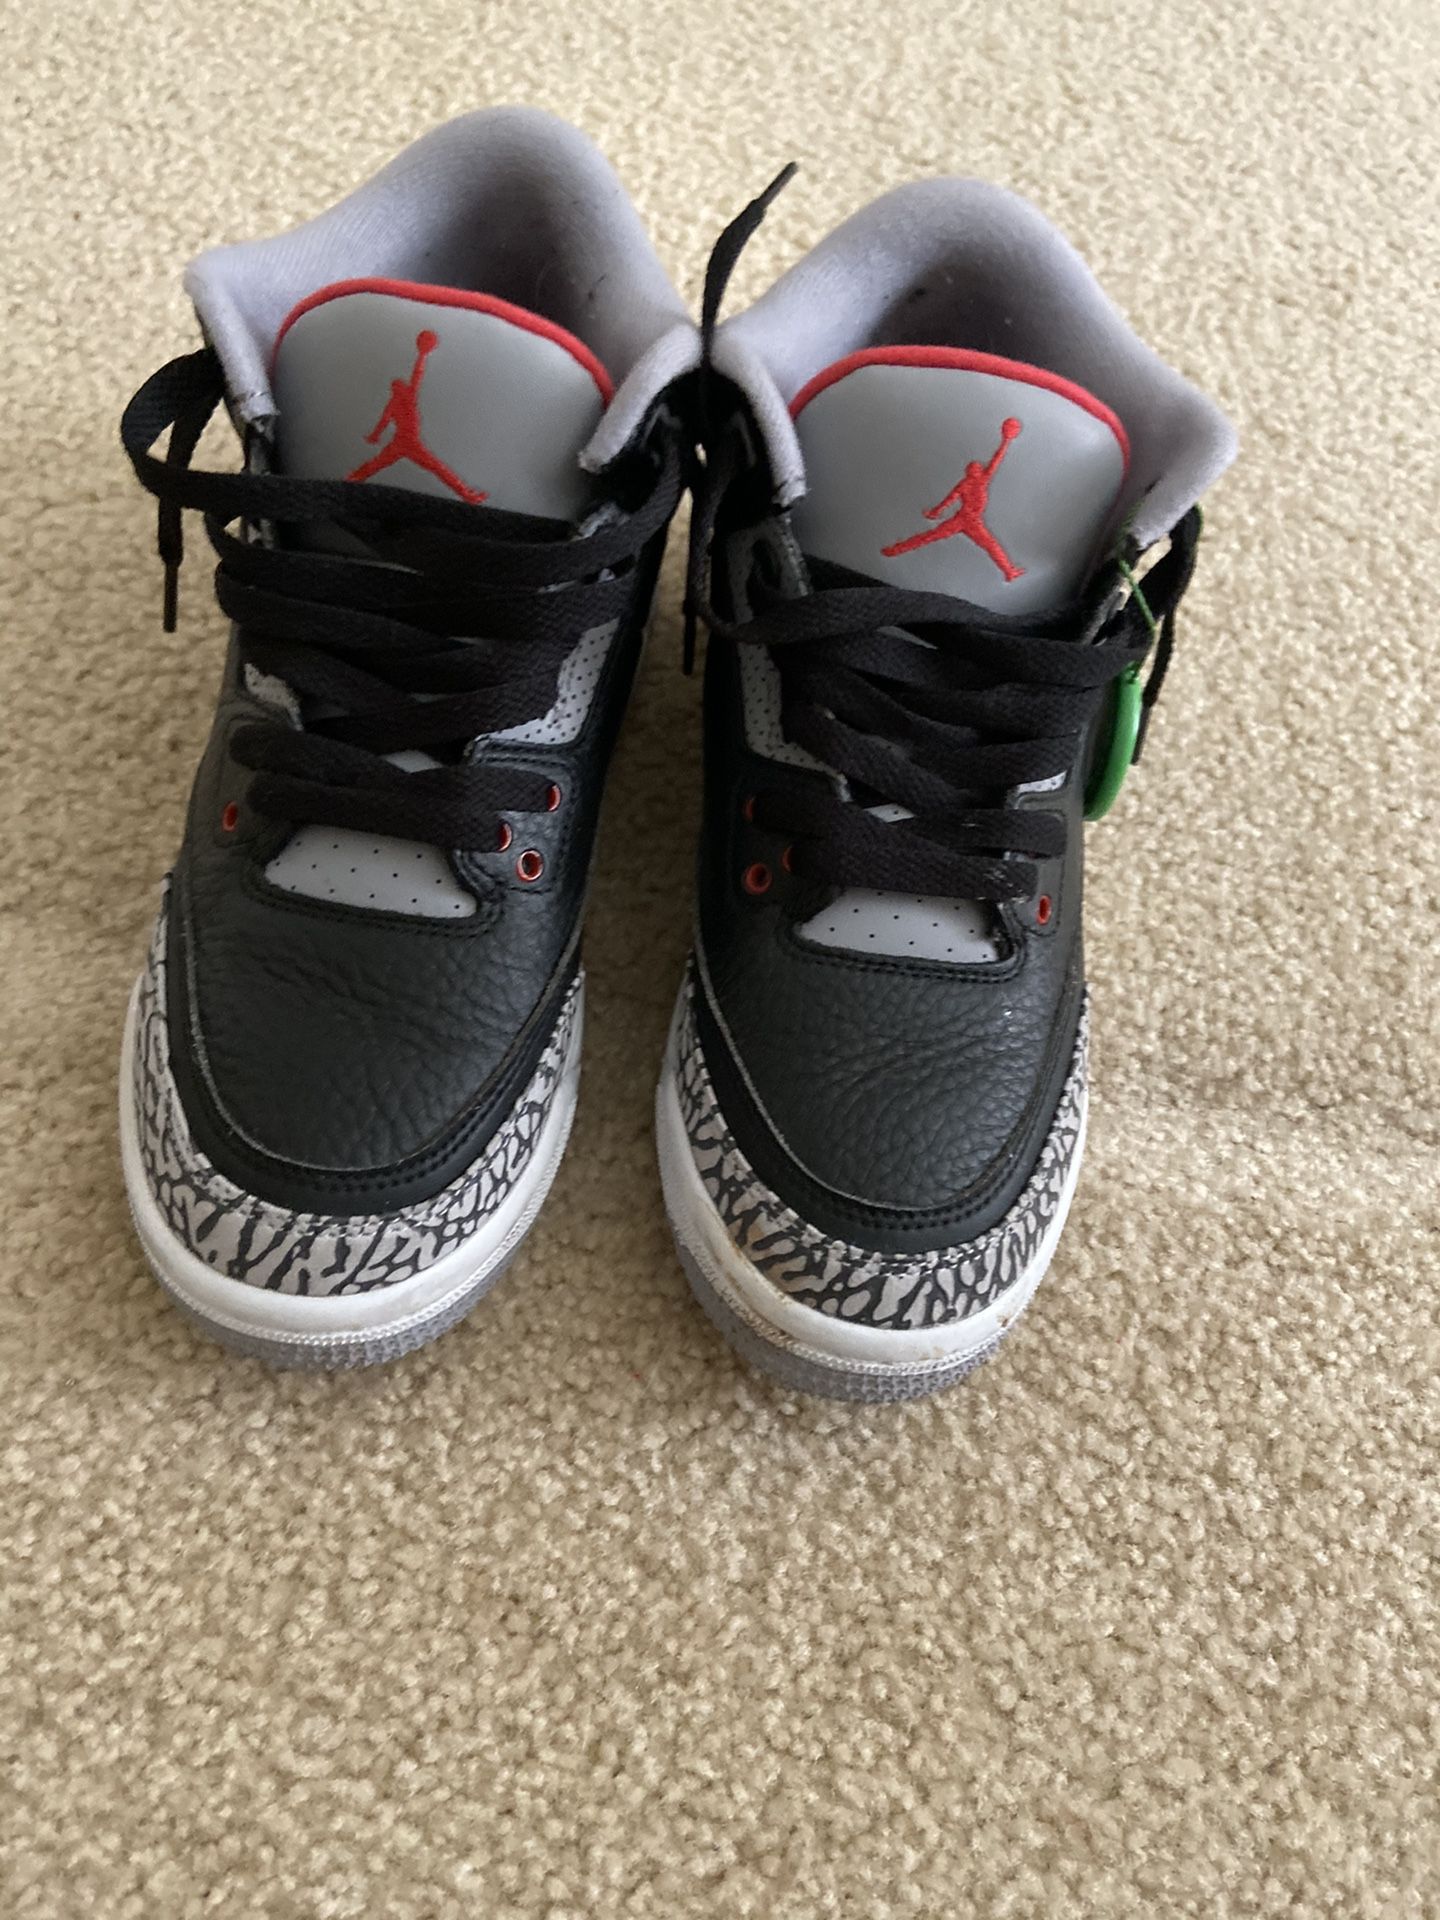 Cement 3s 5.5y